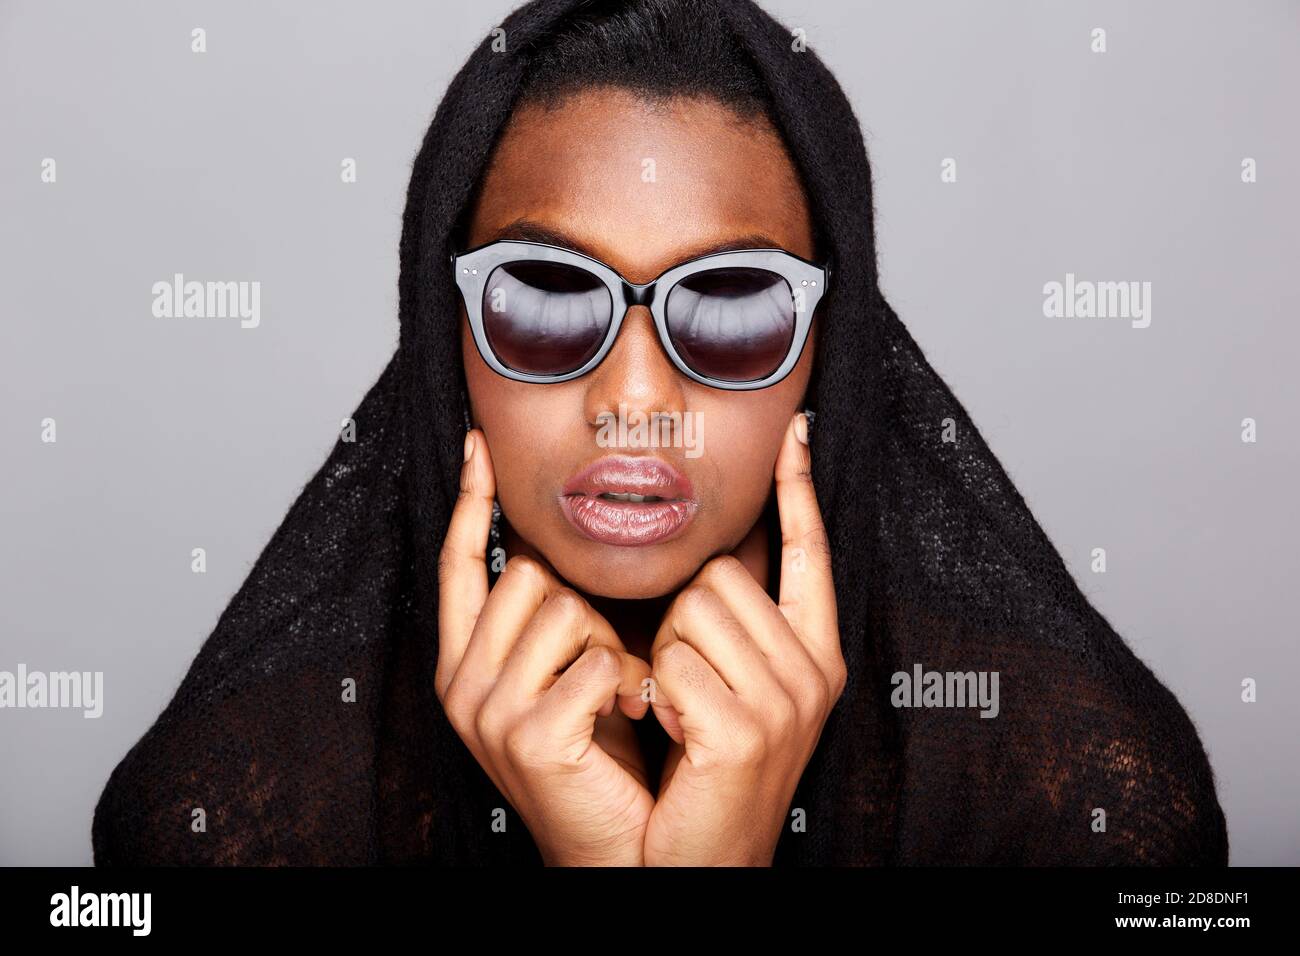 Close up portrait of beautiful black woman with headscarf and sunglasses Stock Photo